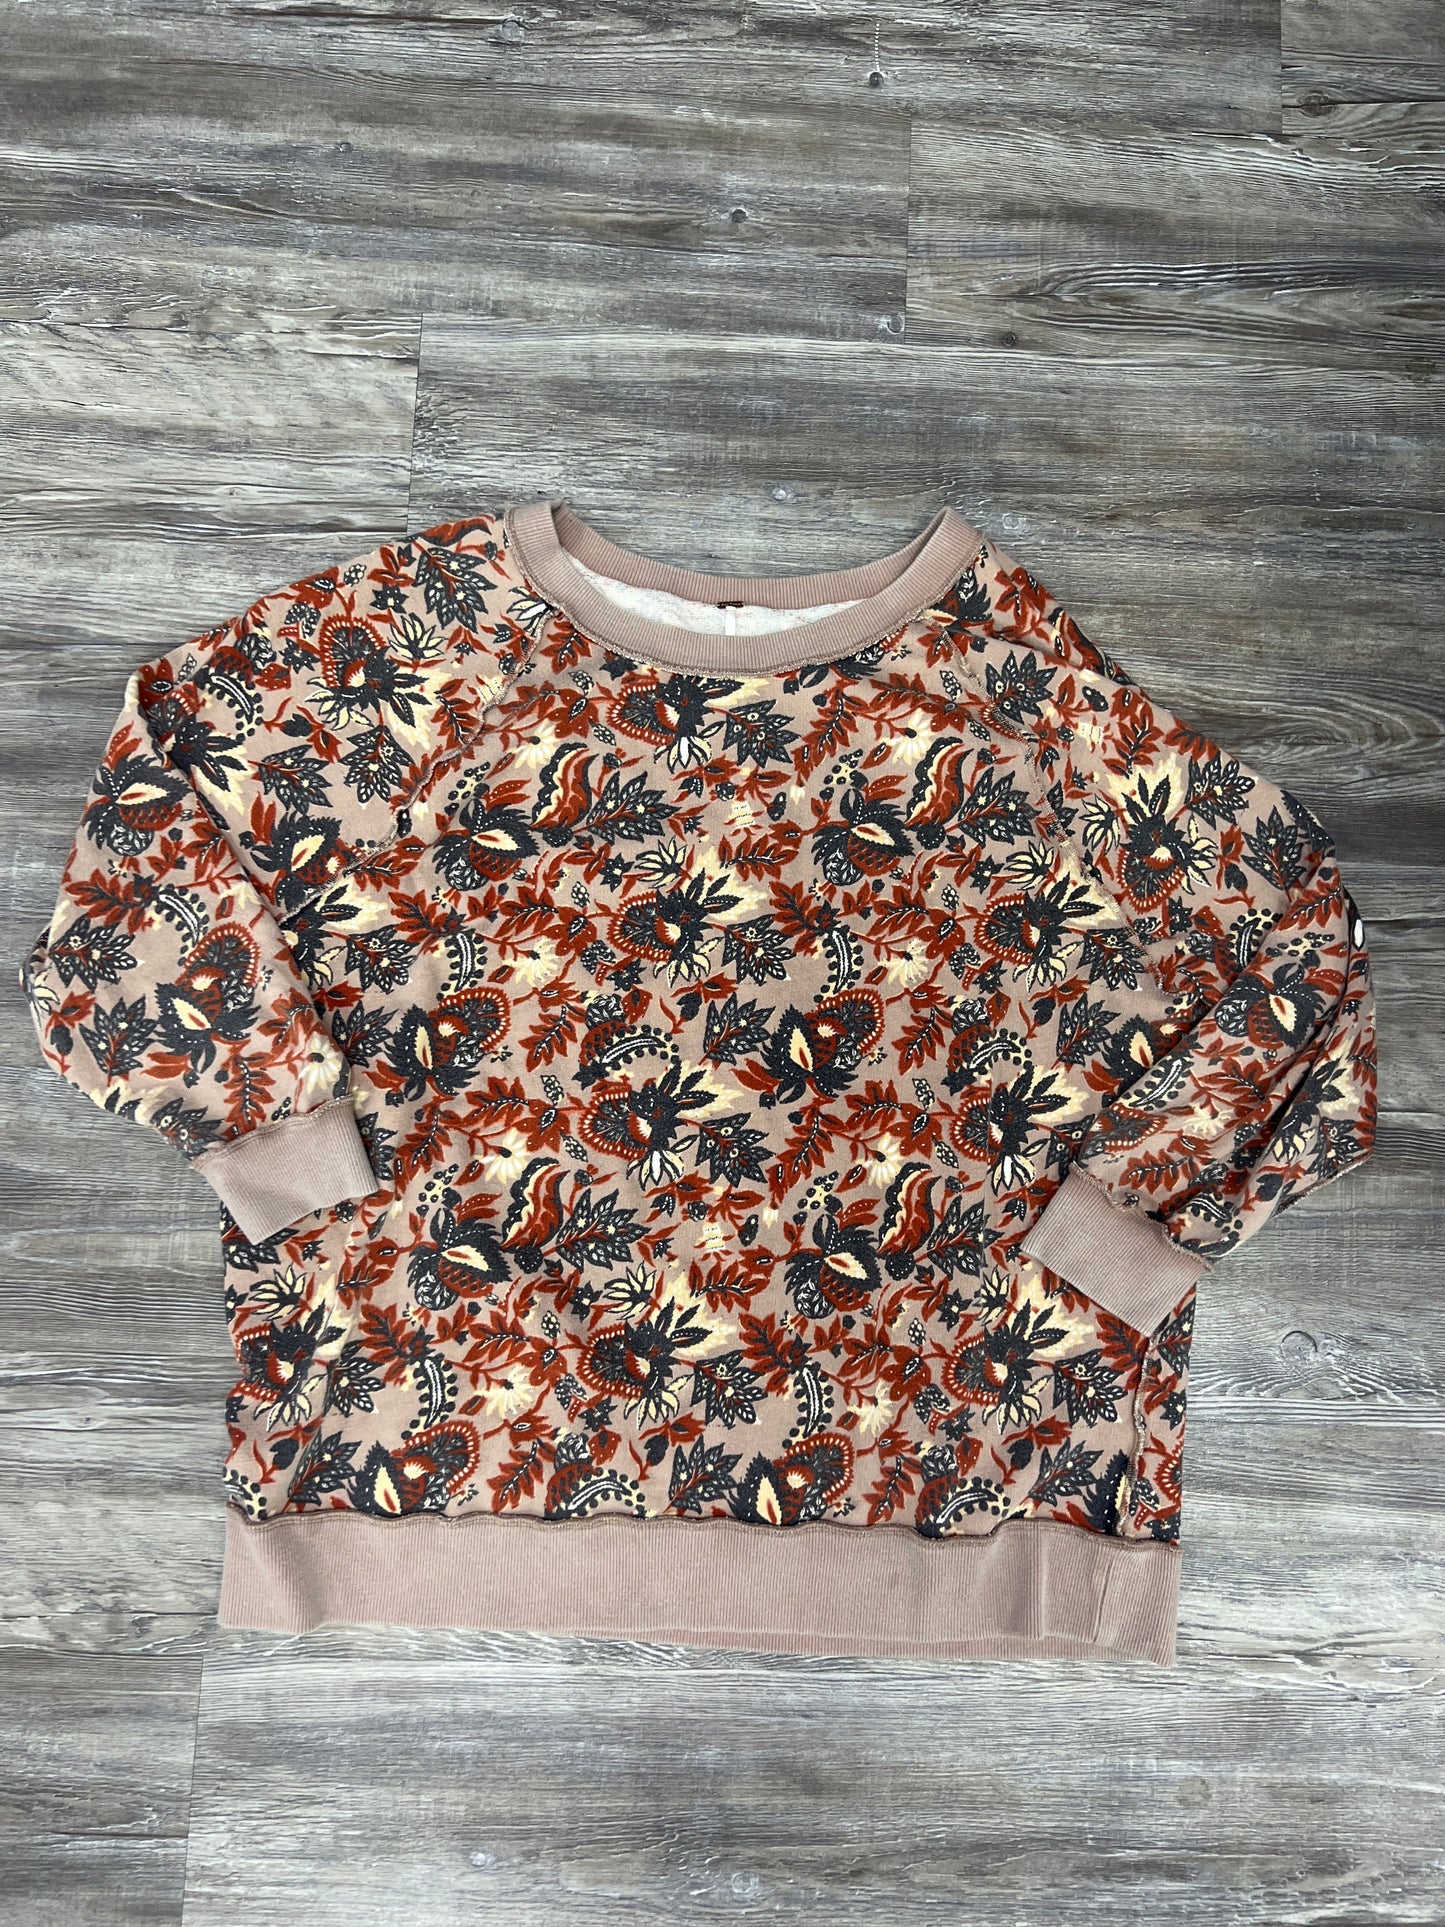 Floral Print Sweater Free People, Size M